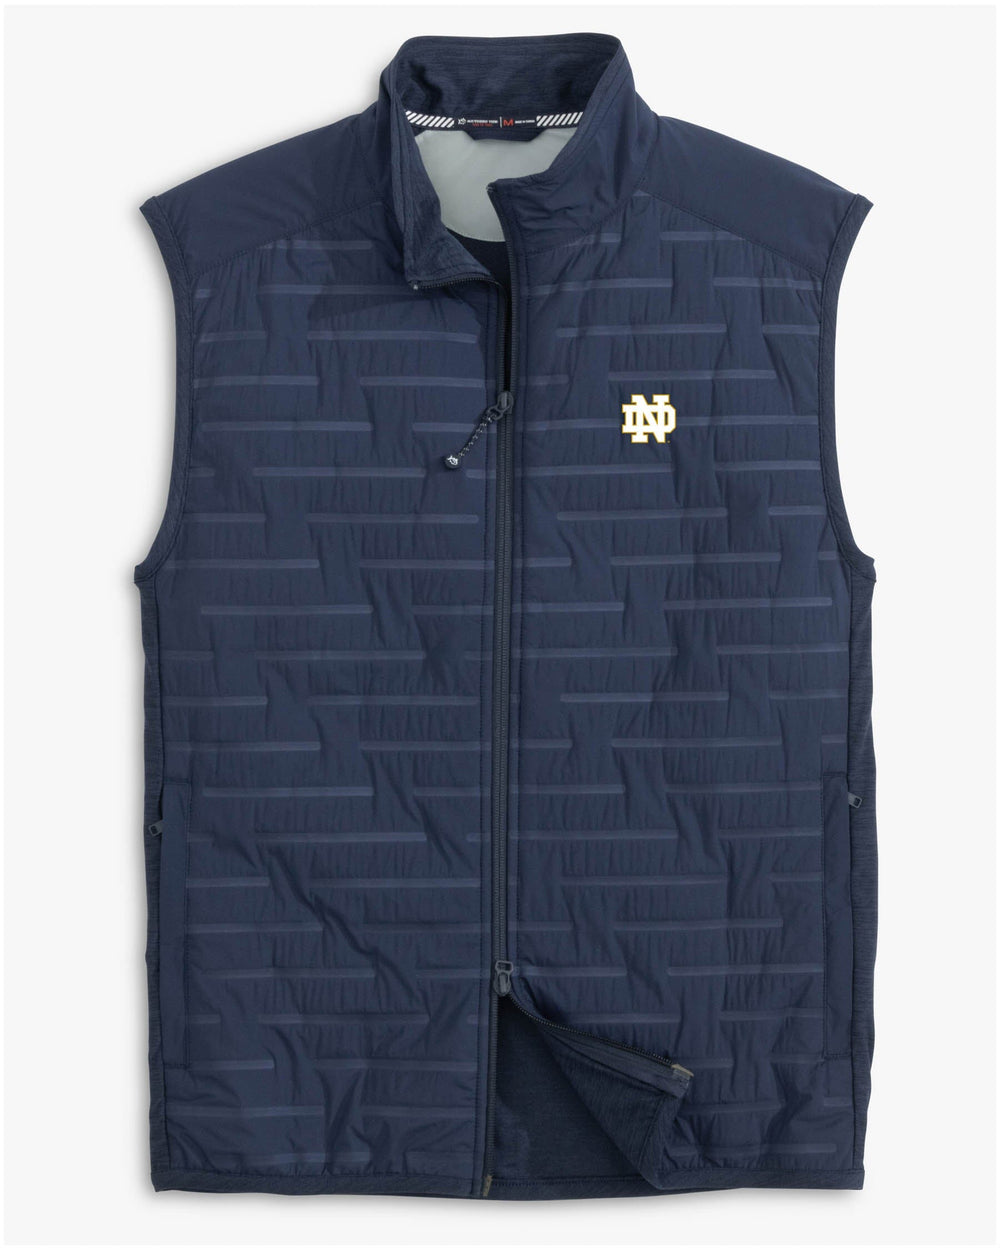 The front view of the Southern Tide Notre Dame Fighting Irish Tide Abercorn Vest by Southern Tide - True Navy